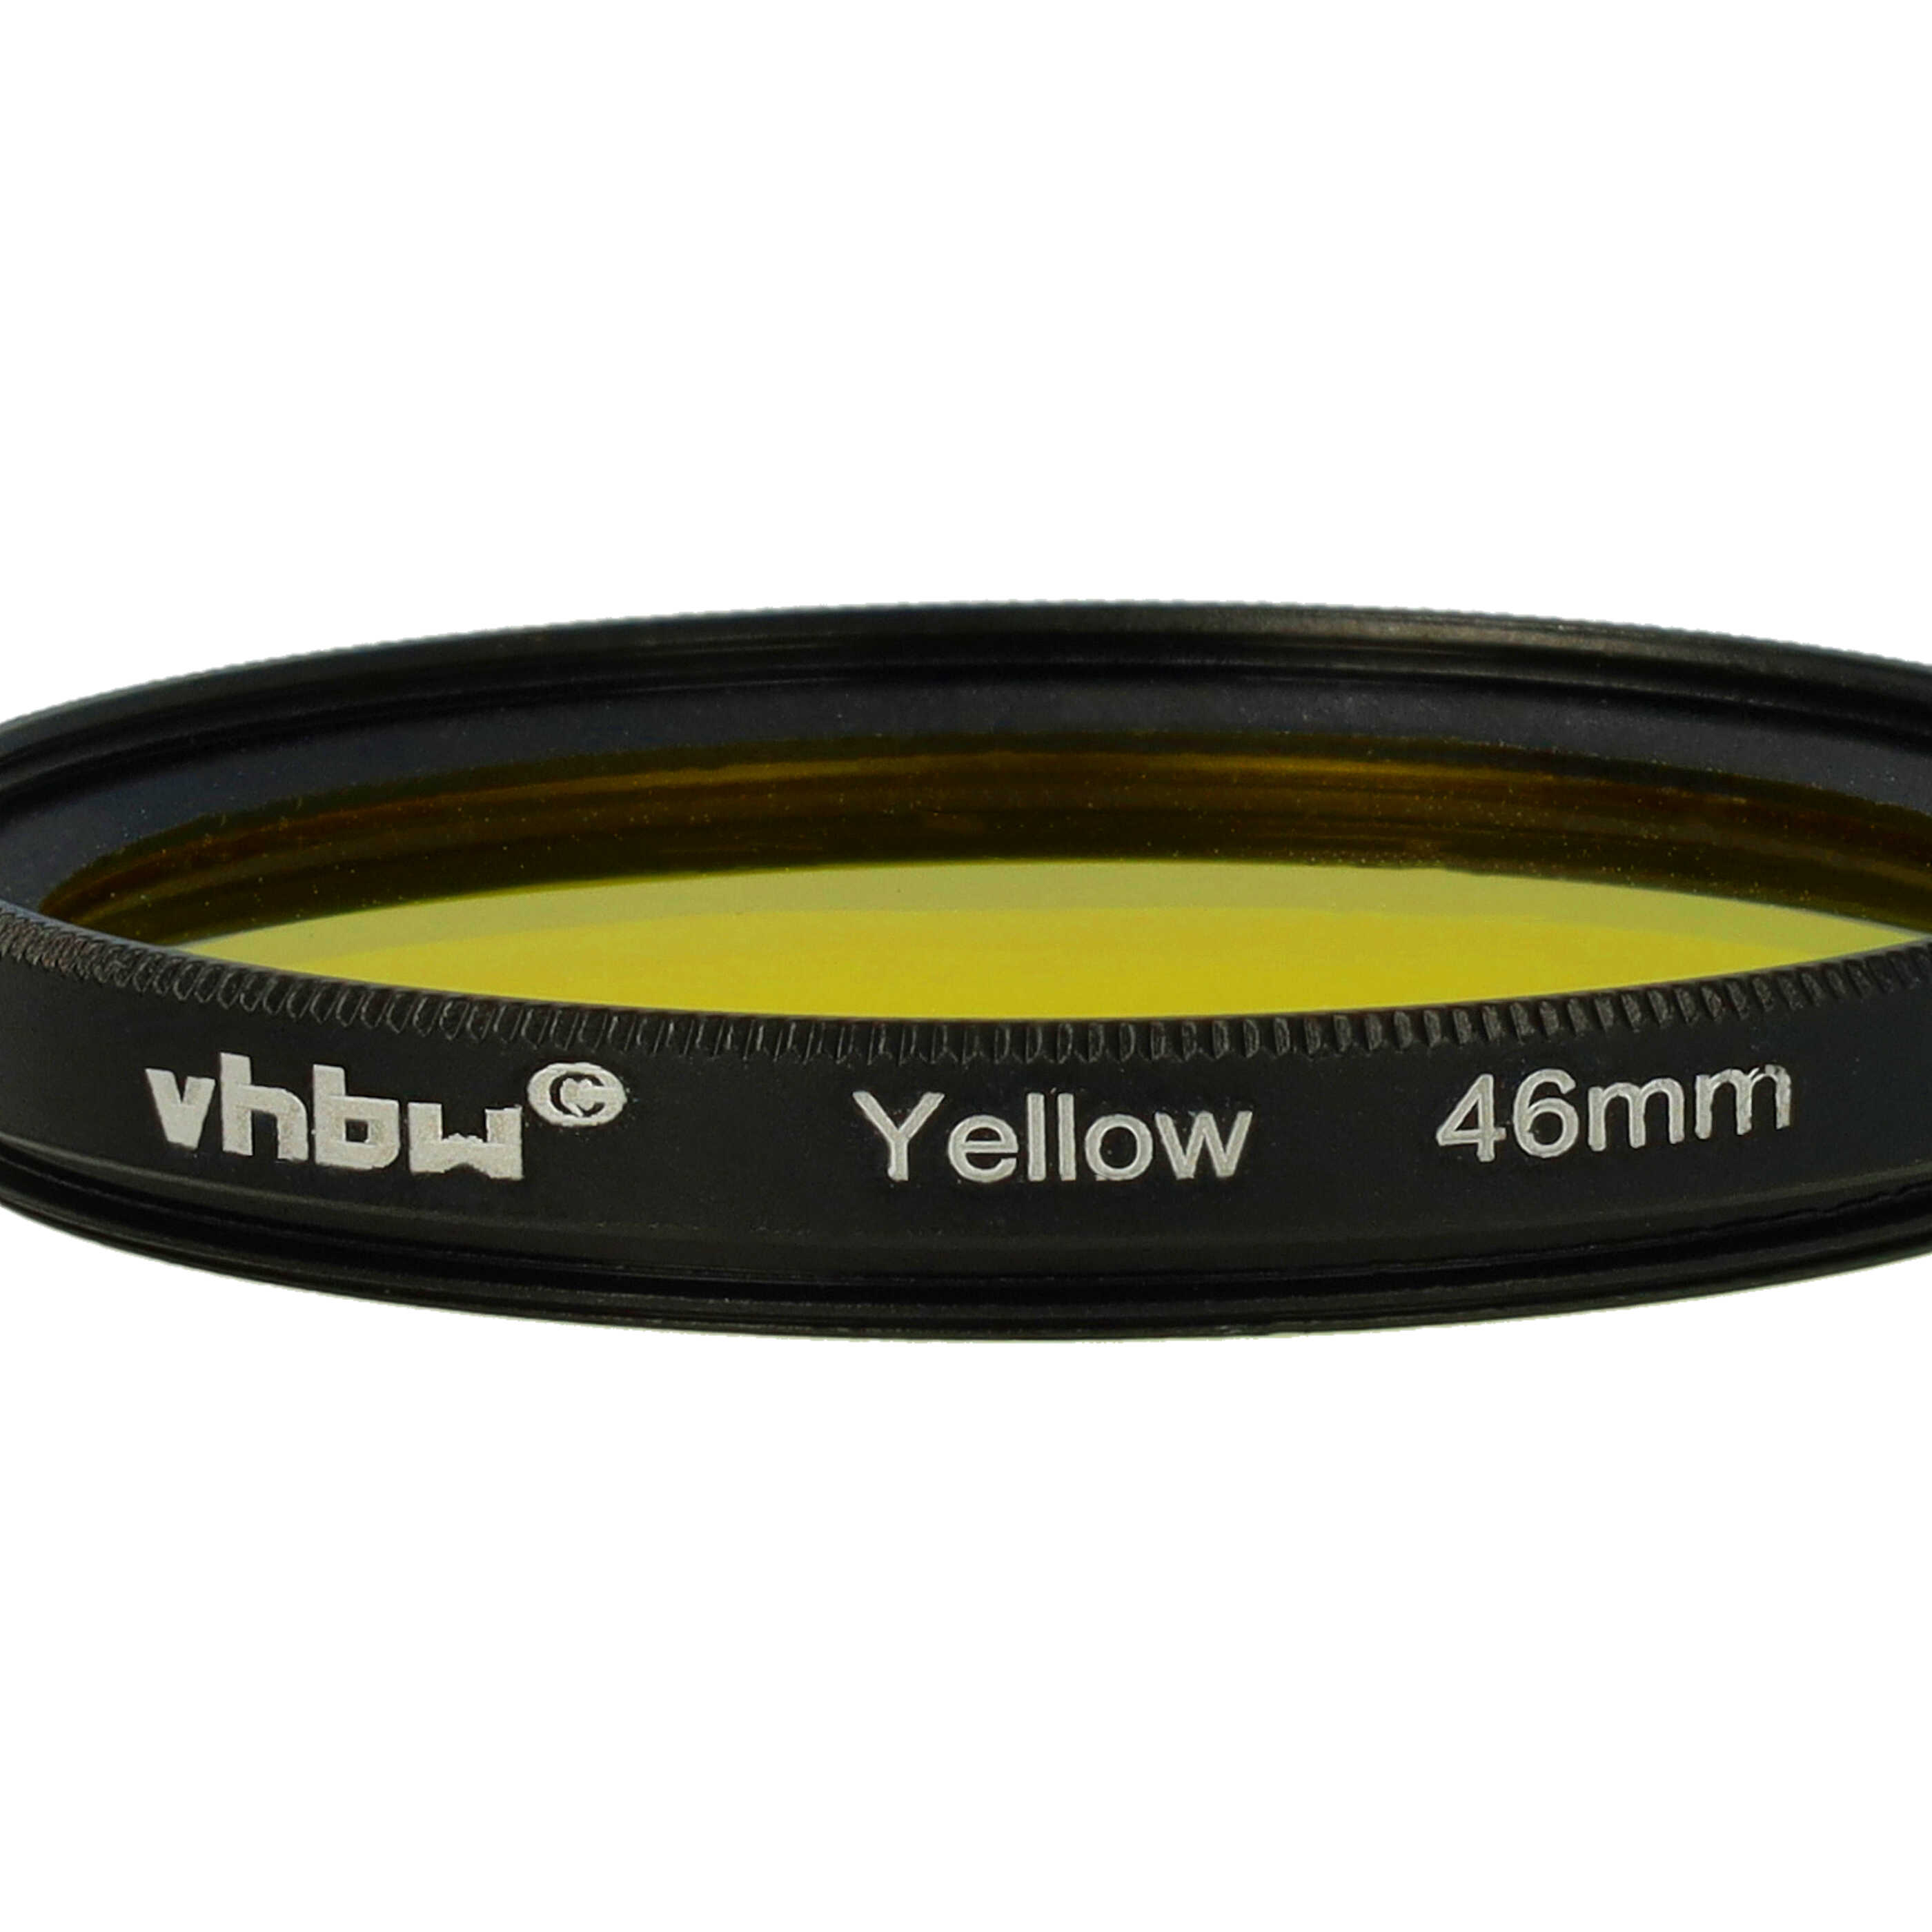 Coloured Filter, Yellow suitable for Camera Lenses with 46 mm Filter Thread - Yellow Filter